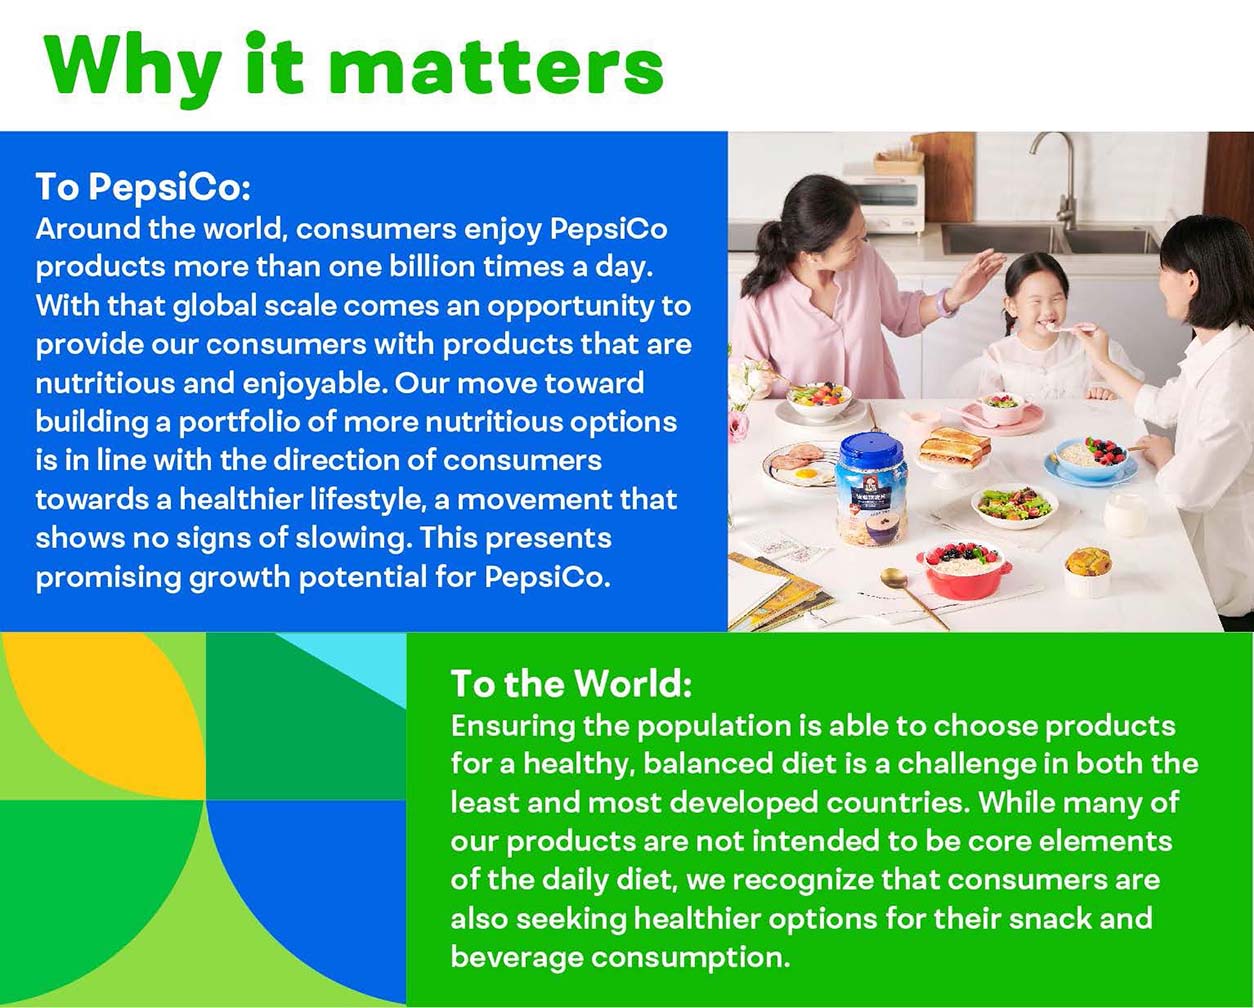 Why it matters: With our global scale comes an opportunity to provide nutritious, enjoyable products. We recognize that consumers are seeking healthier options for their consumption.